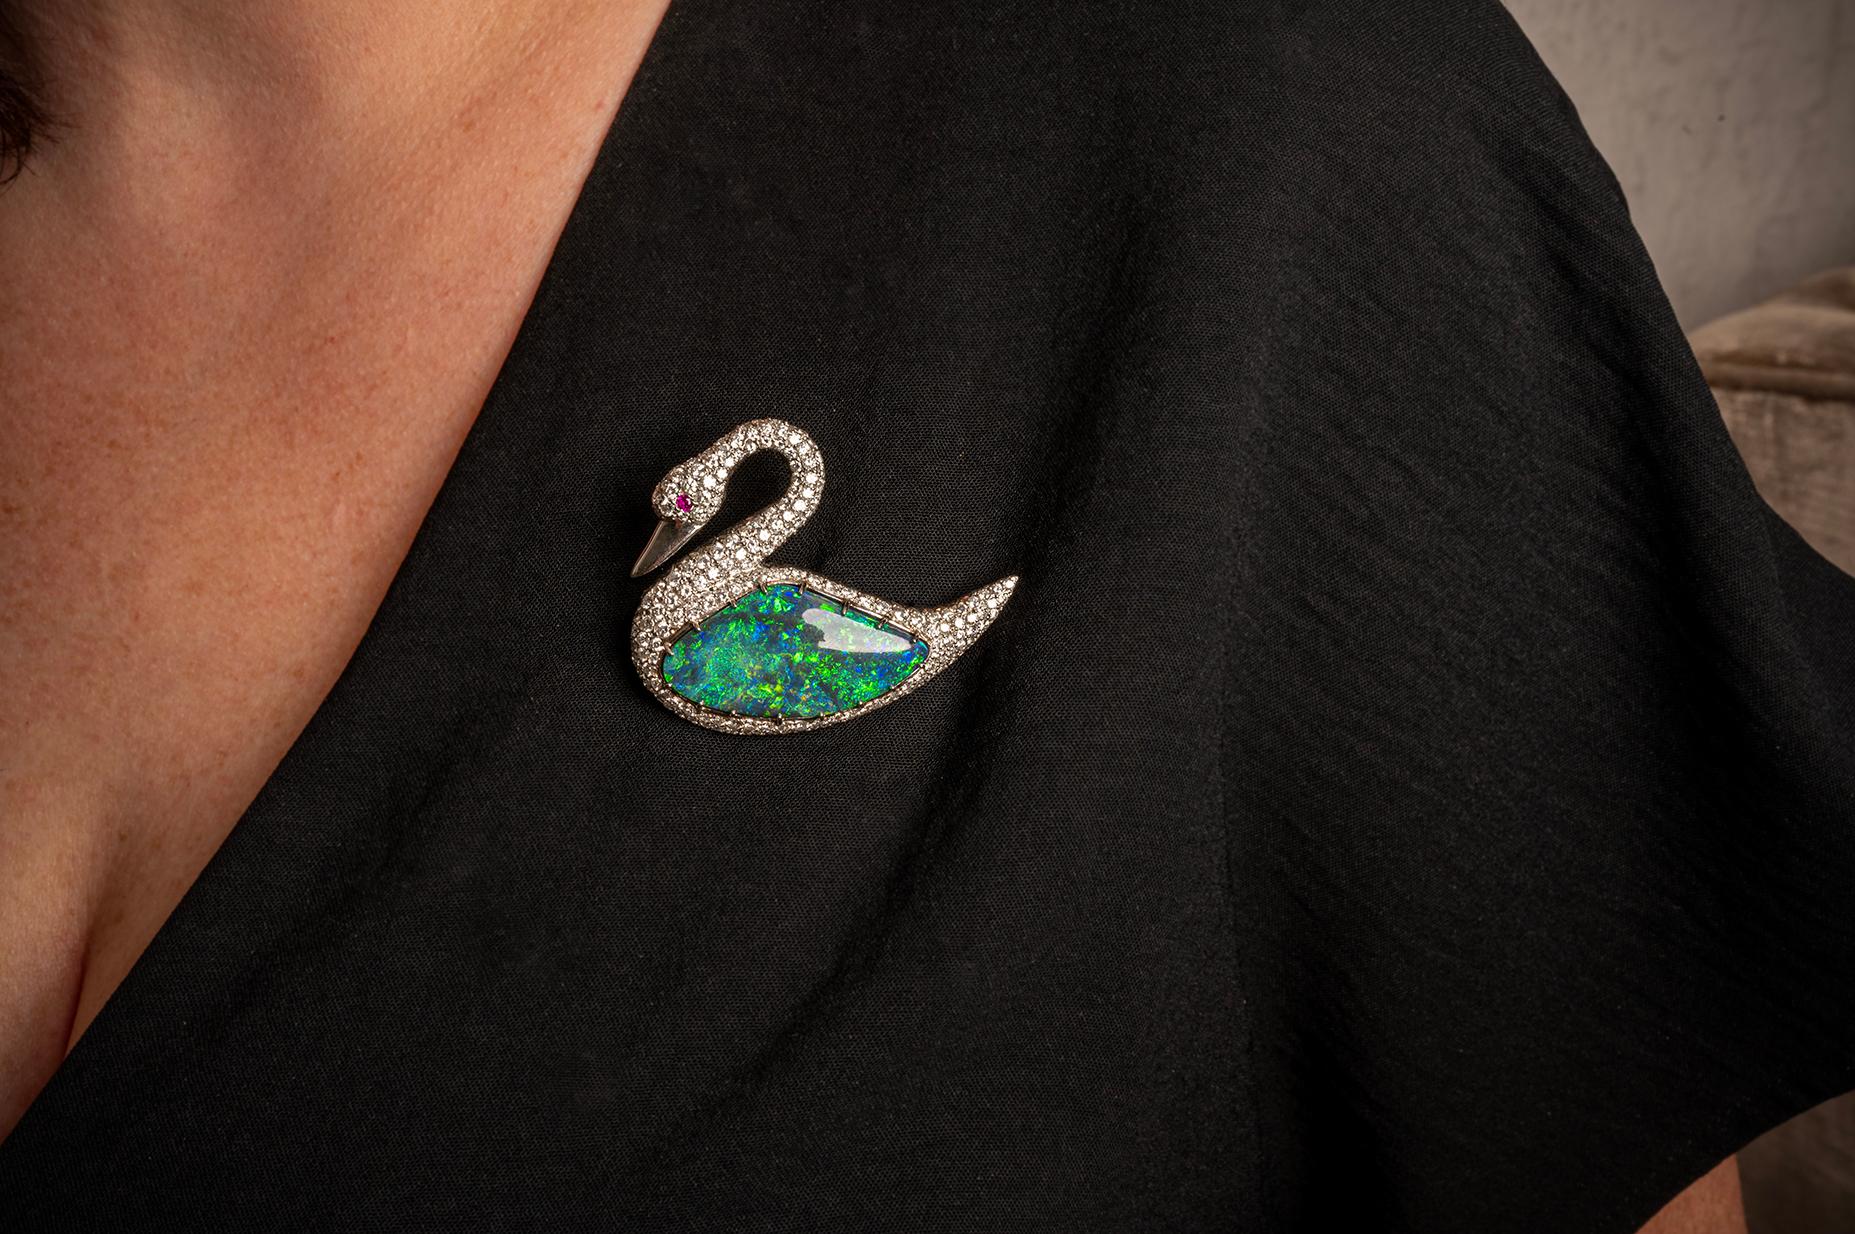 Black Australian Opal & Diamond Swan Brooch/Pendant in Platinum. The swan features a 21.83ct Black Australian Opal and 2.50ctw of round diamonds. The swan can be worn as a brooch or pendant. 
Dimensions 2.25